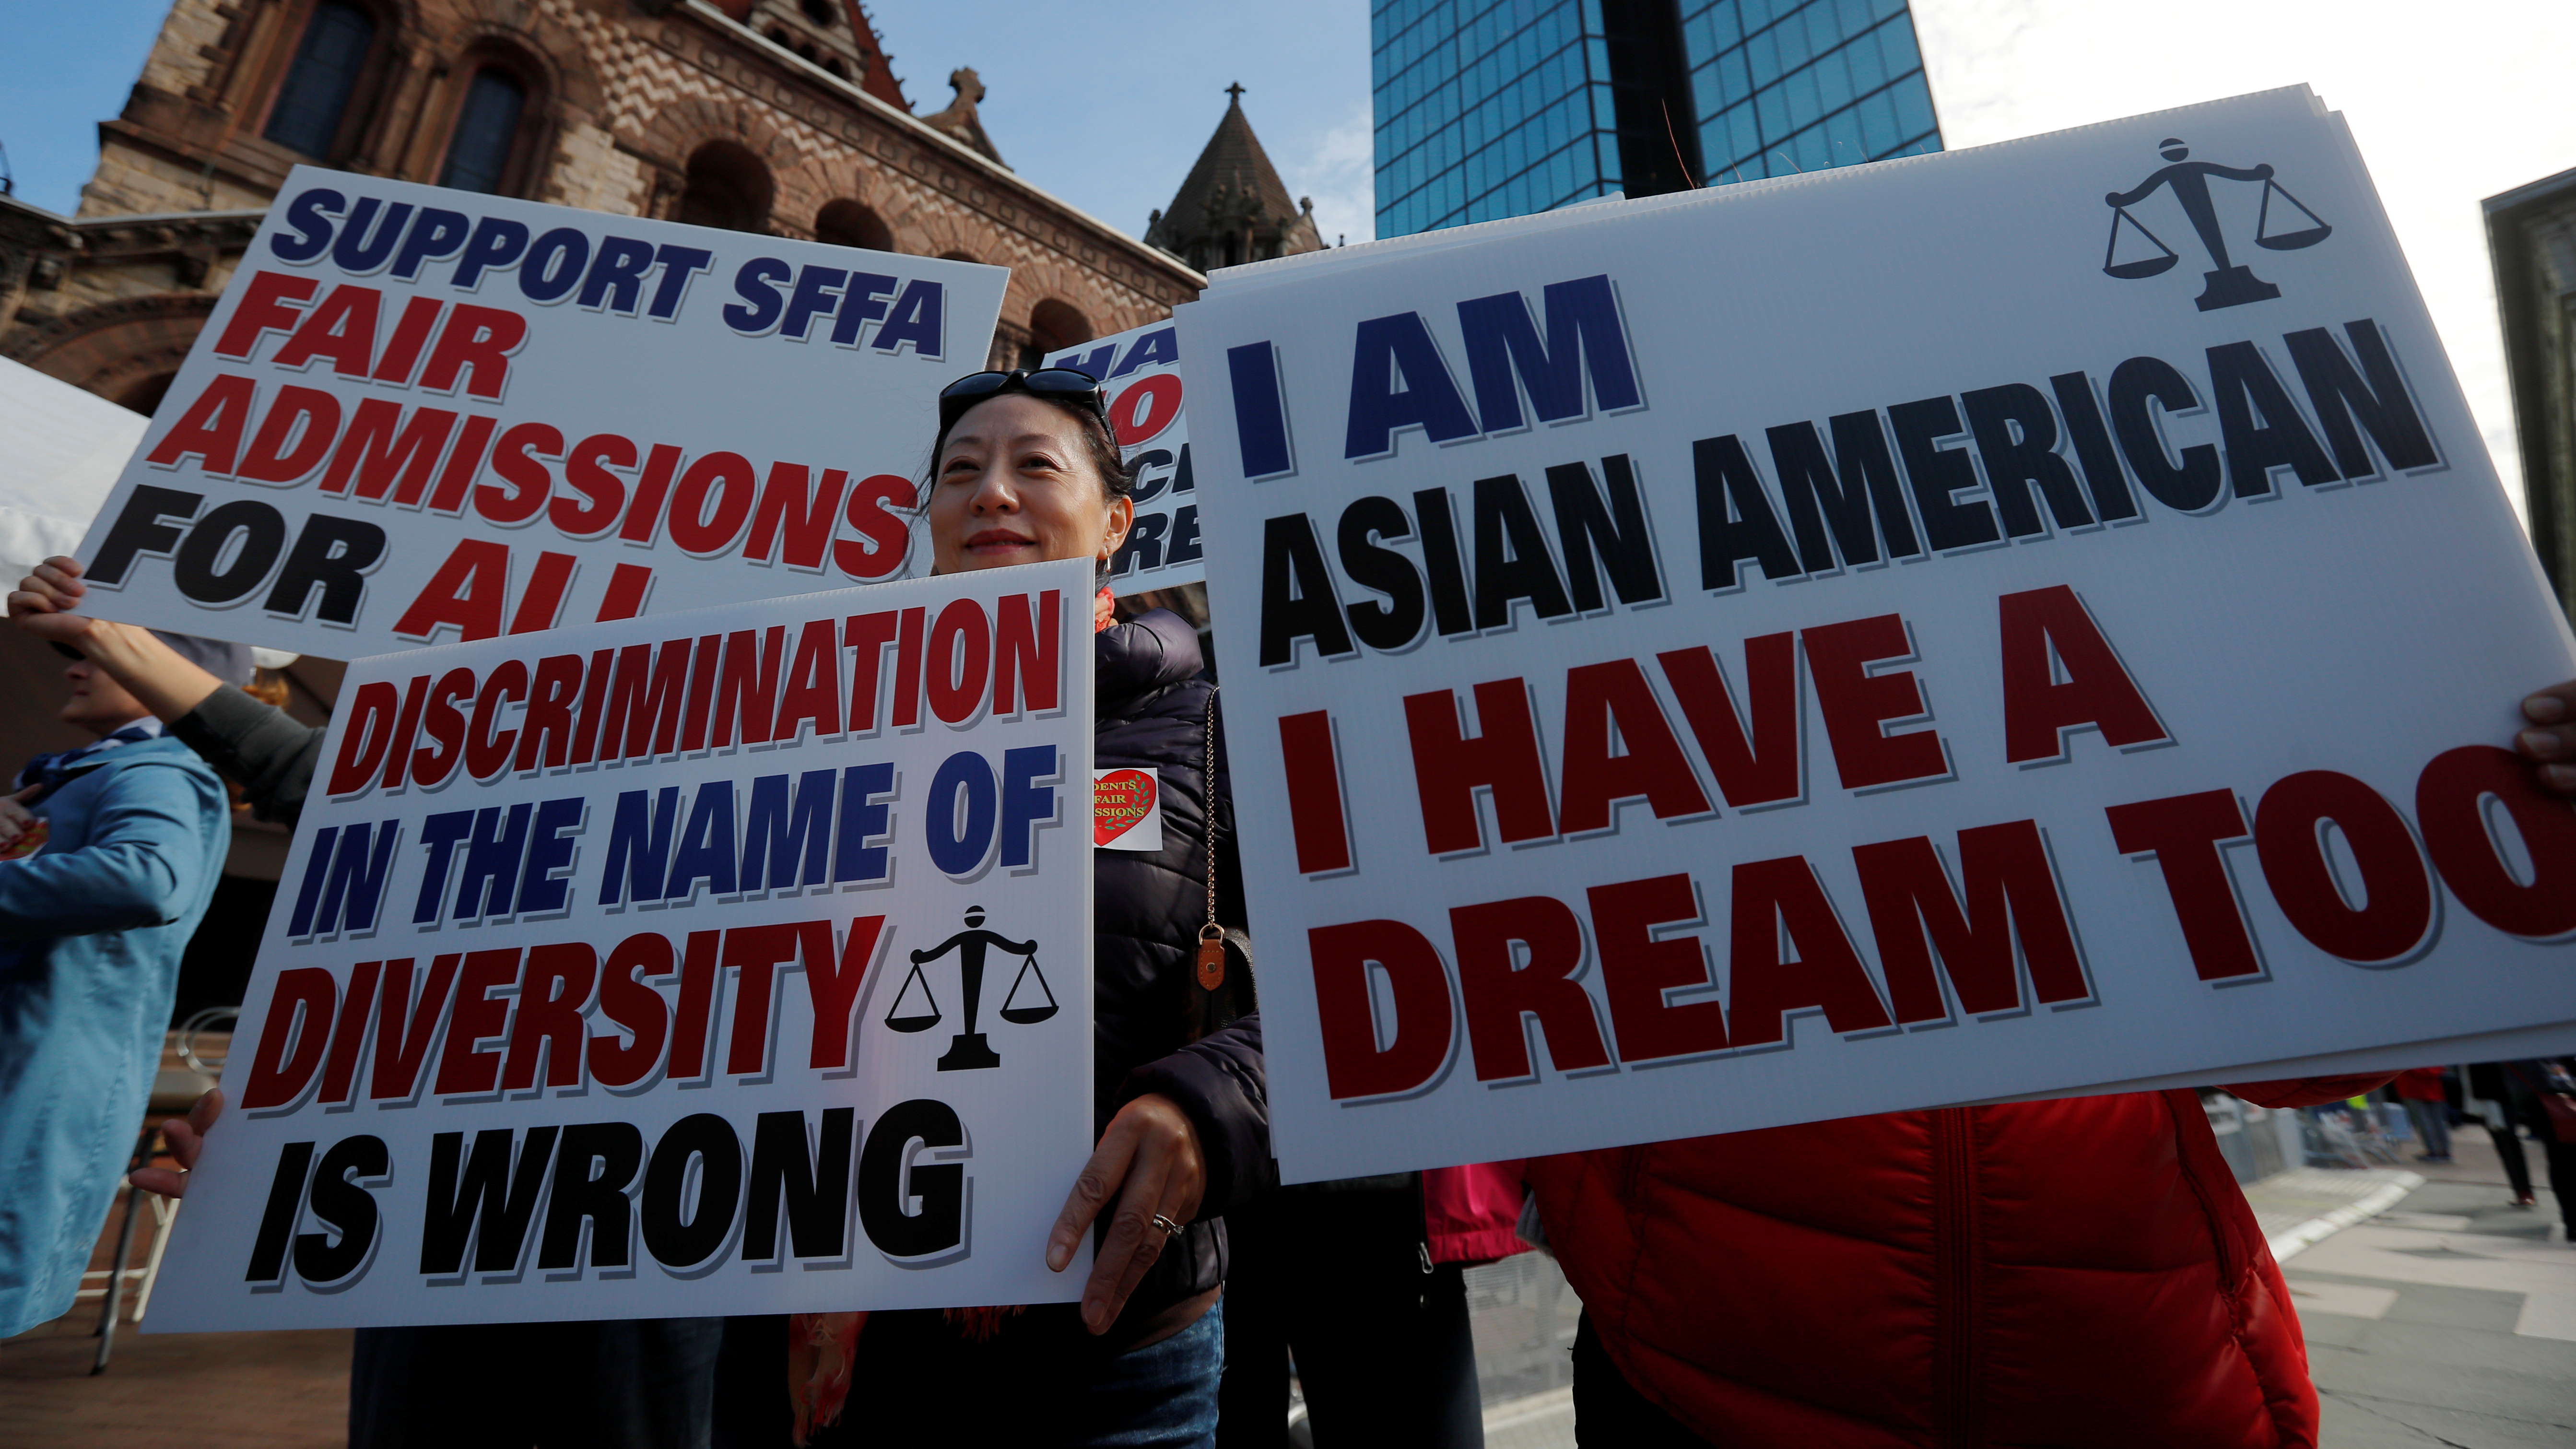 Supporters attend the "Rally for the American Dream - Equal Education Rights for All," ahead of the start of the trial in a lawsuit accusing Harvard University of discriminating against Asian-American applicants, in Boston, Massachusetts, U.S., October 14, 2018. REUTERS/Brian Snyder